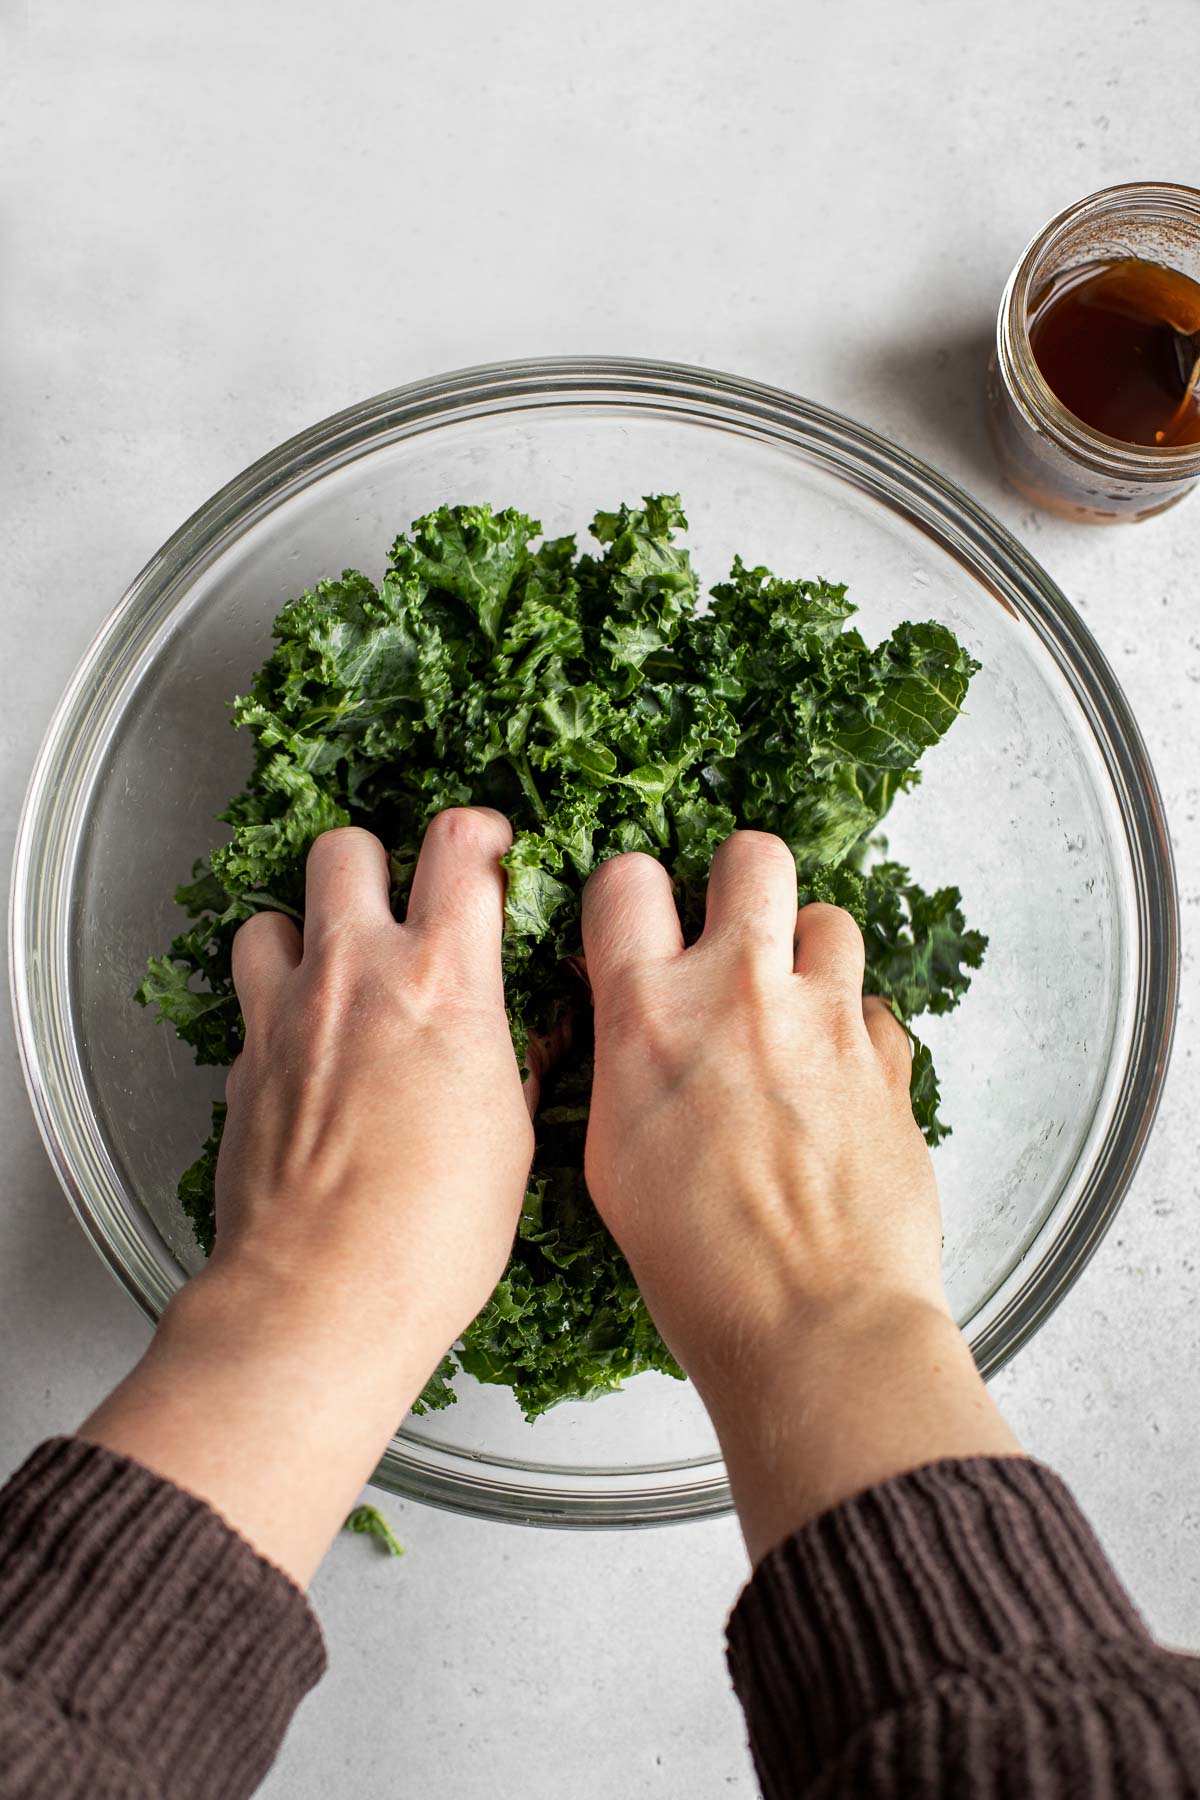 A clear glass mixing bowl filled with shredded kale and drizzled with cider-cinnamon vinaigrette is being massaged by a pair of woman's hands to help work the vinaigrette into the kale. A small mason jar filled with additional cider-cinnamon dressing rests alongside the mixing bowl and the bowl and mason jar sit atop a creamy white textured surface.